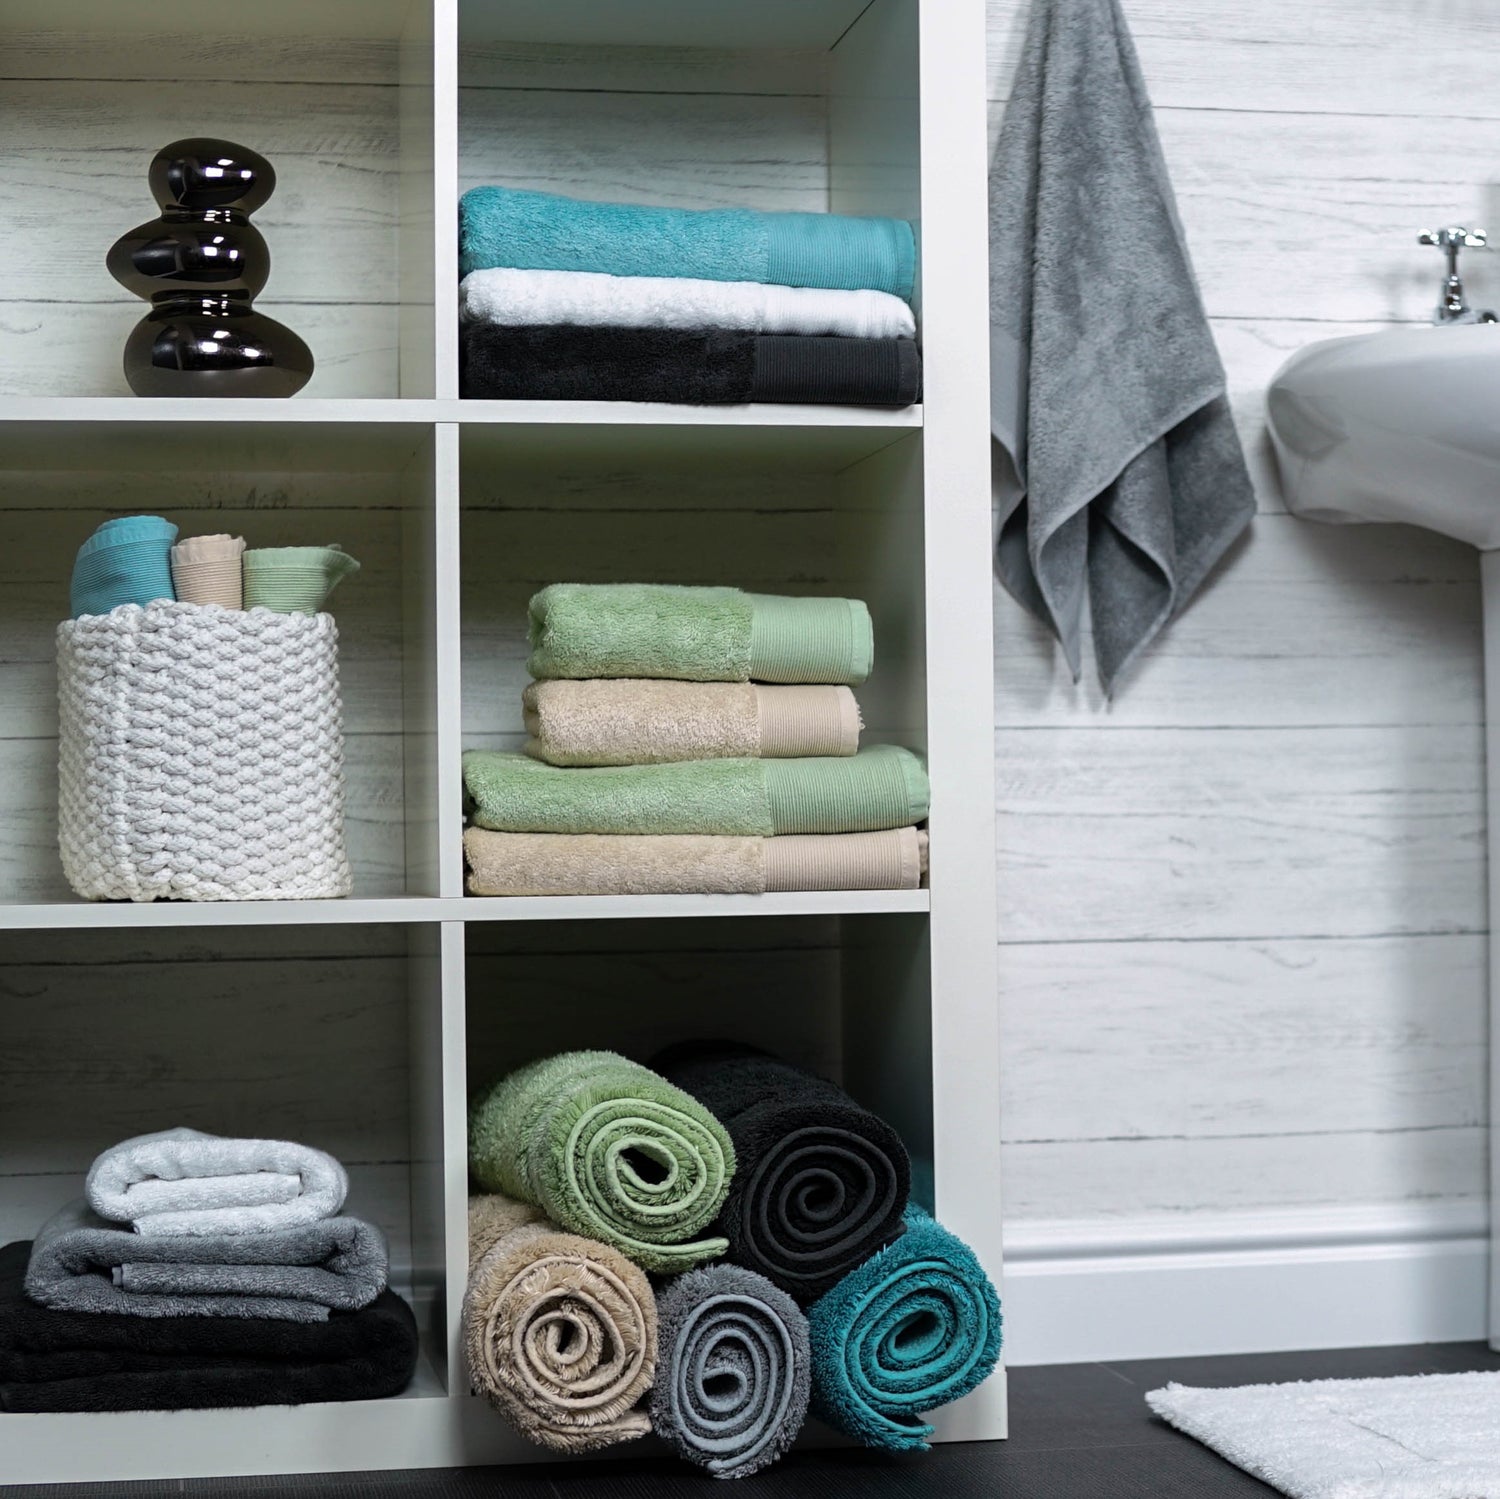 Bamboo Towels and Bath Mats - Sustainable Alternative 